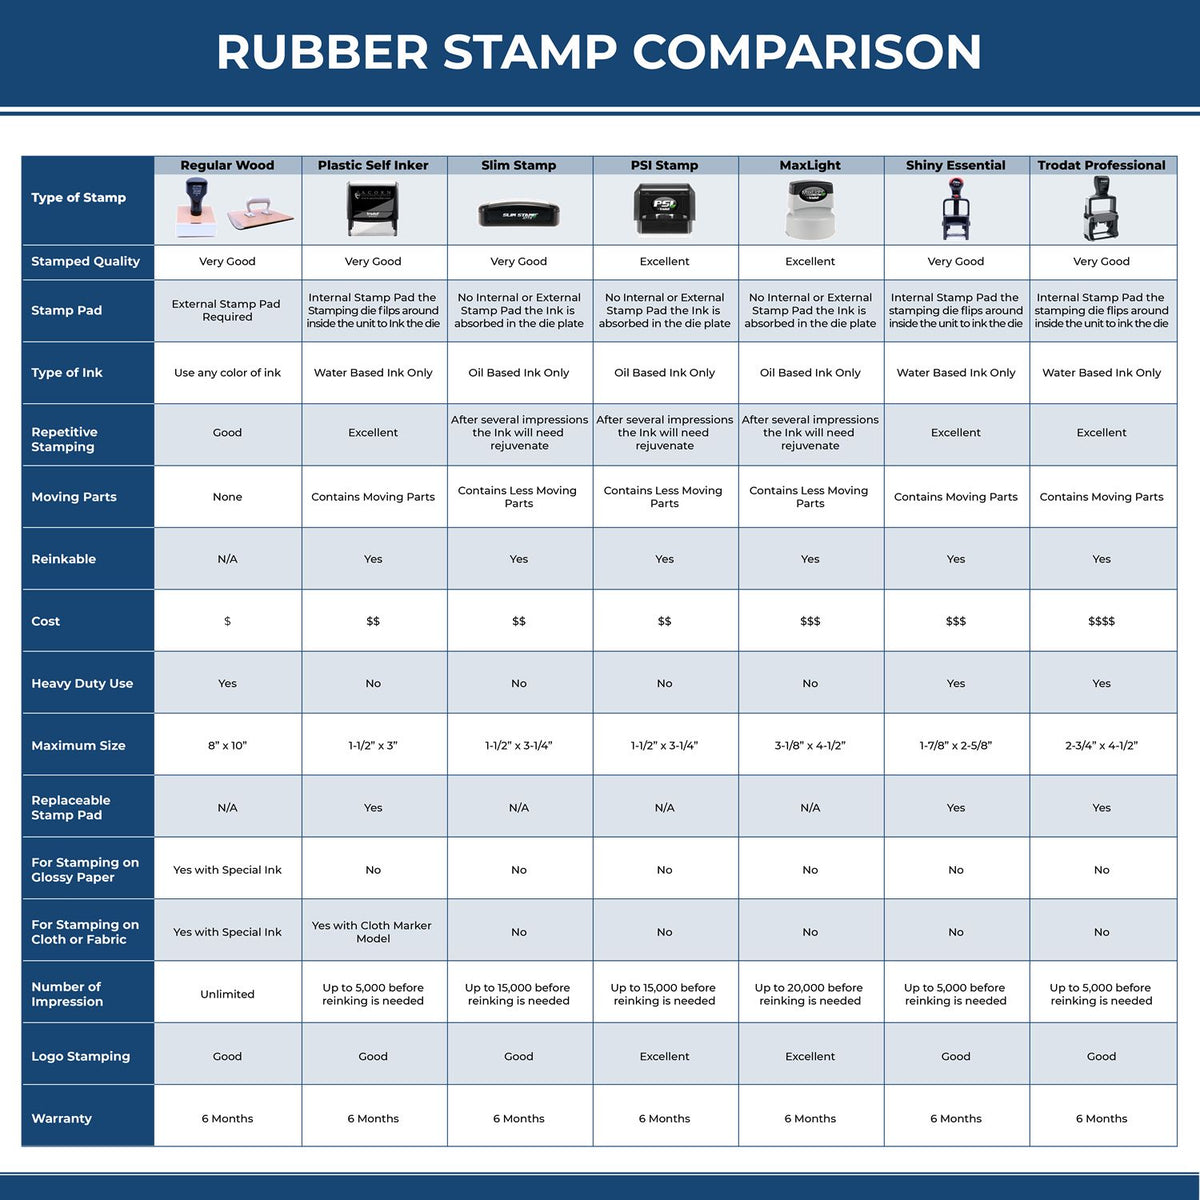 Narrow First Class Mail Rubber Stamp 4815R Rubber Stamp Comparison